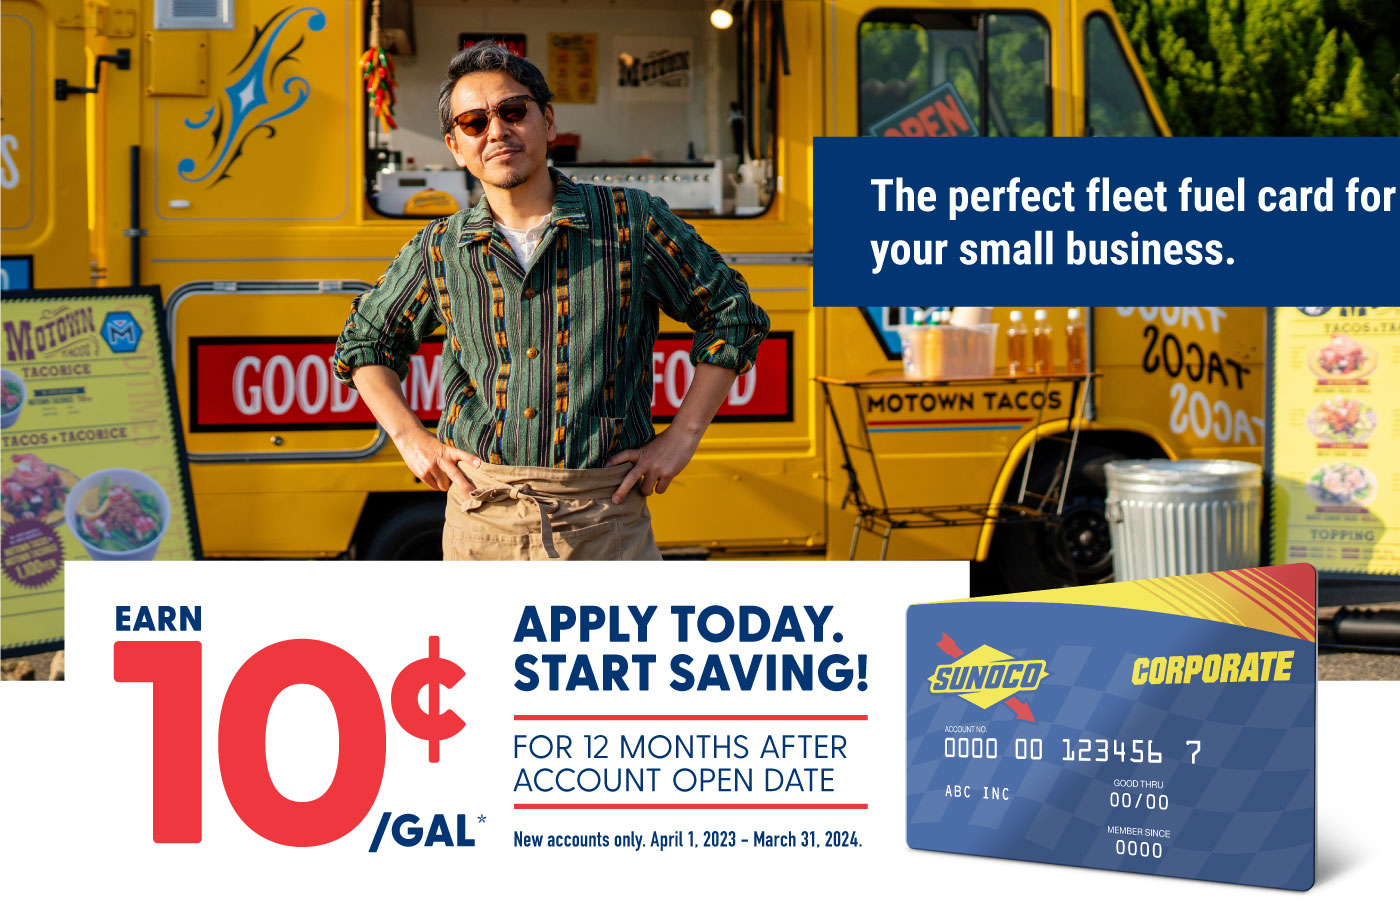 The perfect fuel card for your small business or fleet